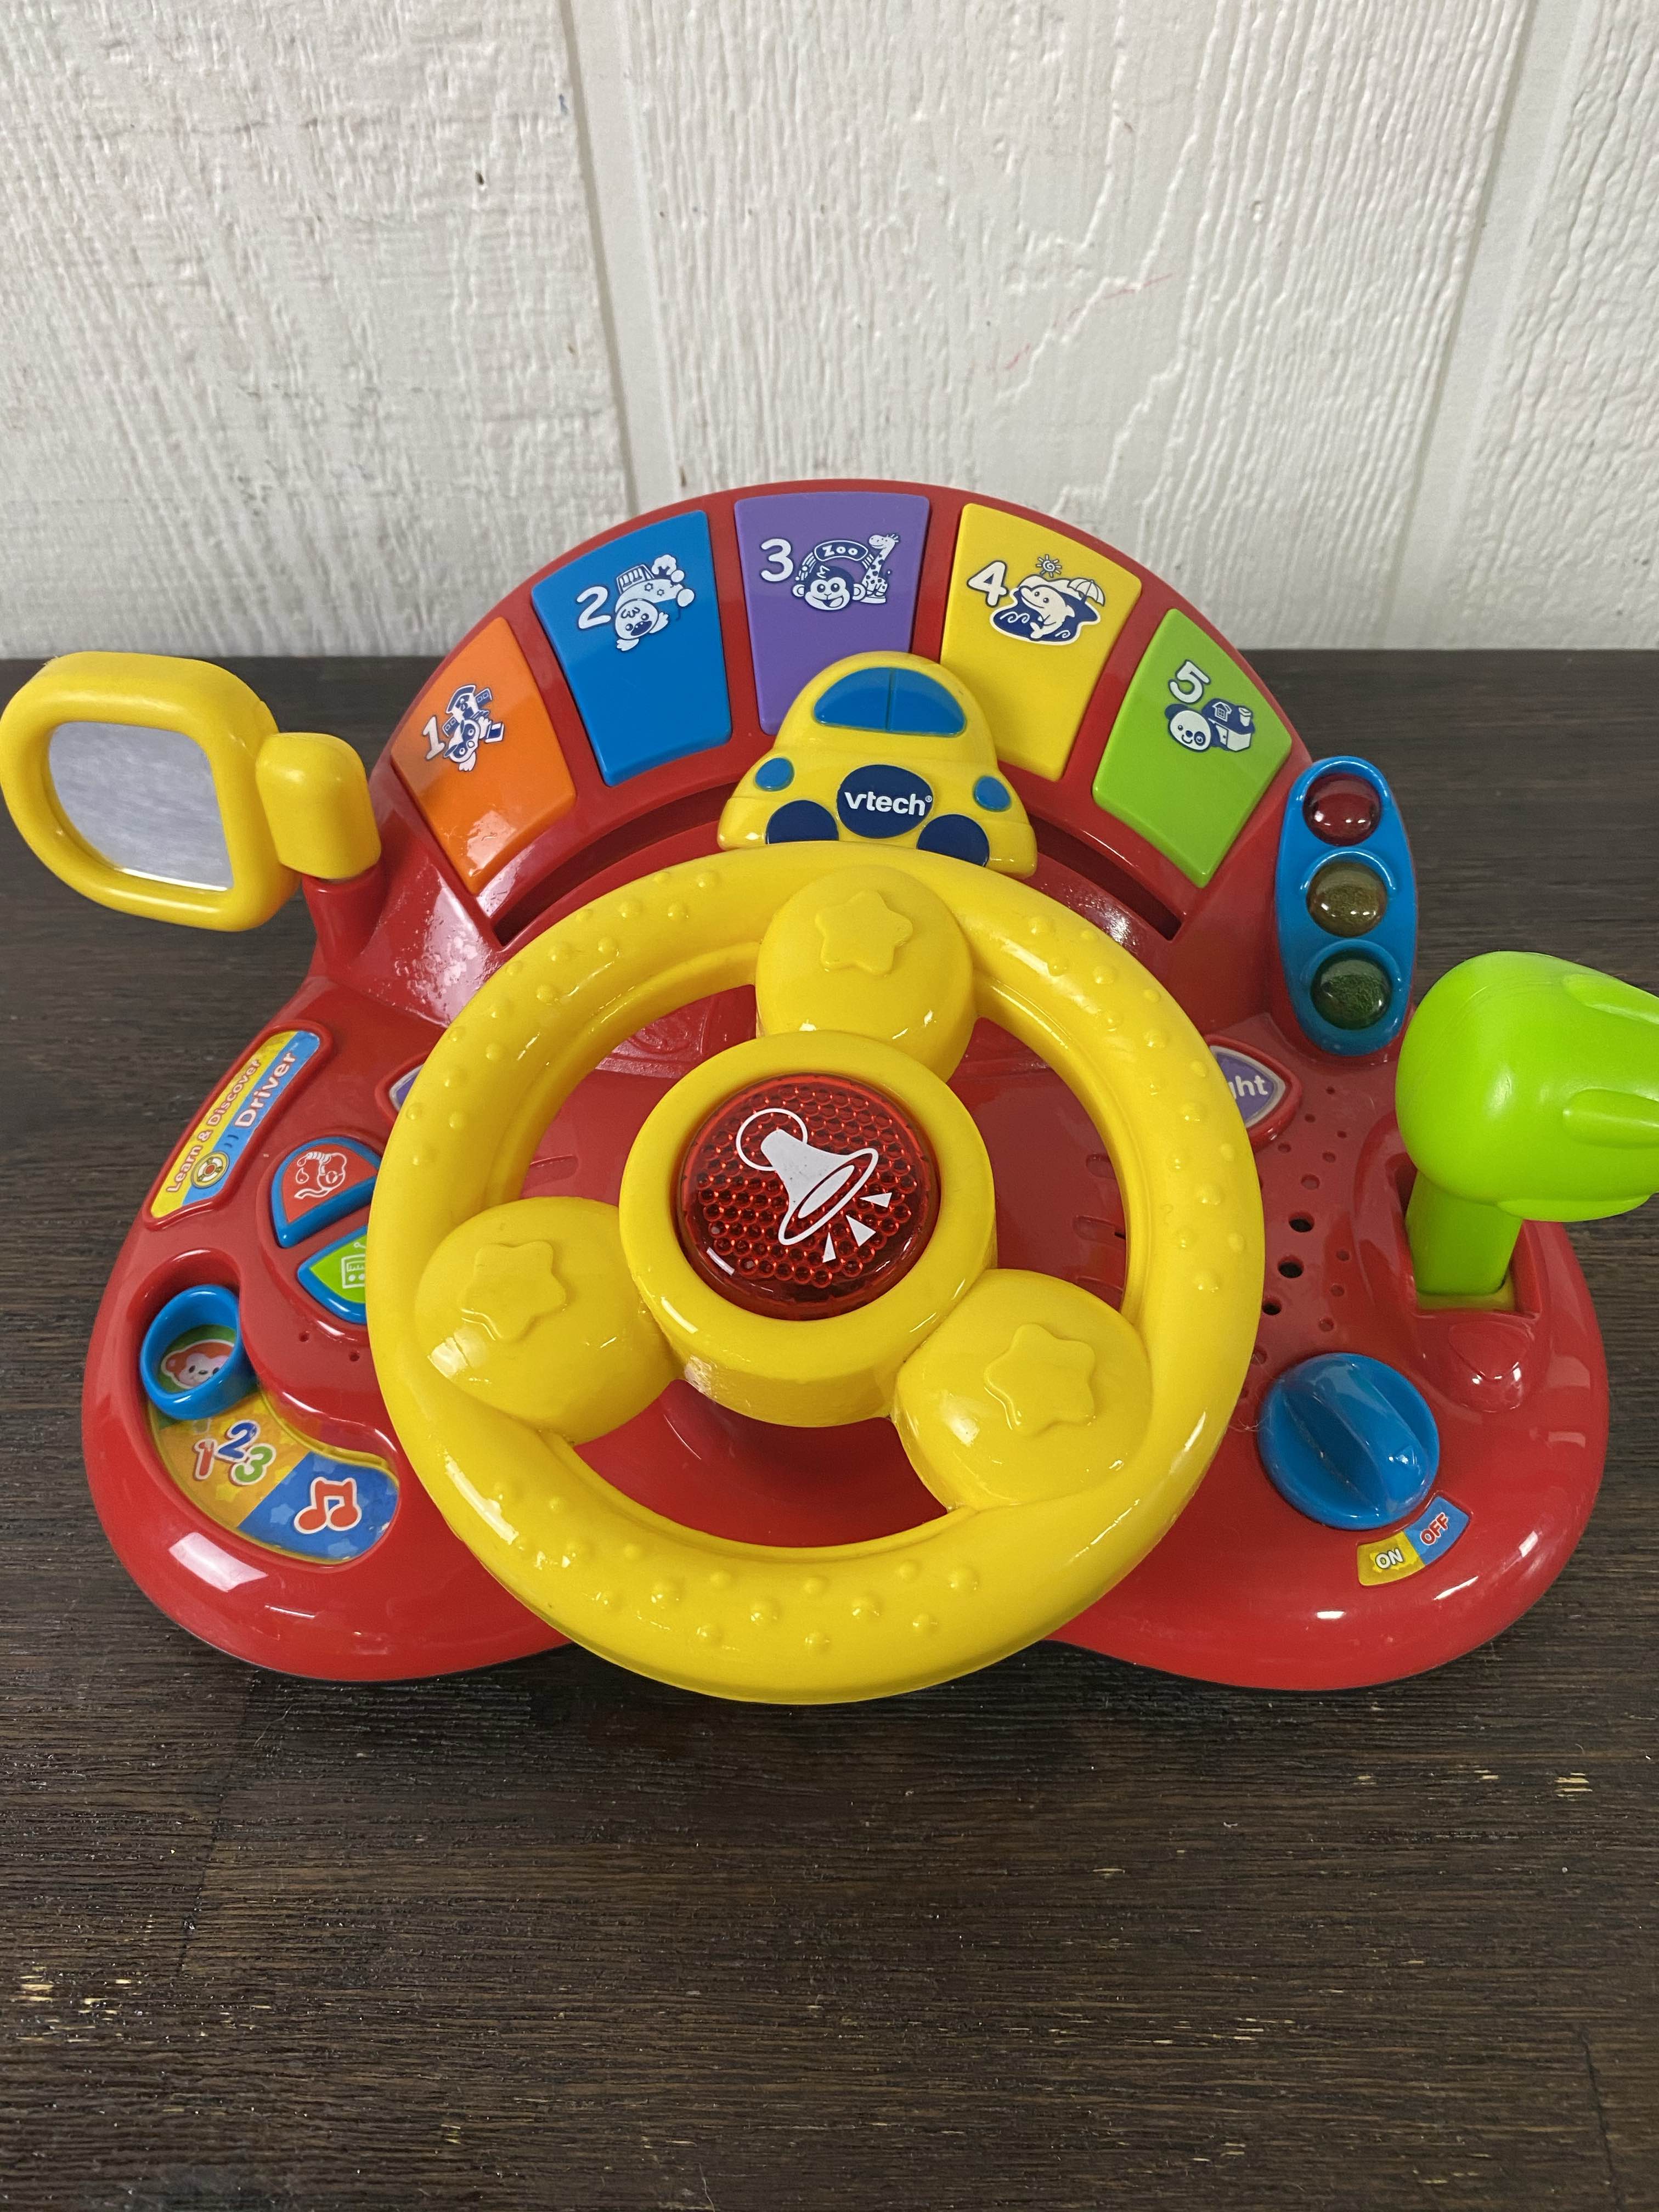 vtech turn and learn driver